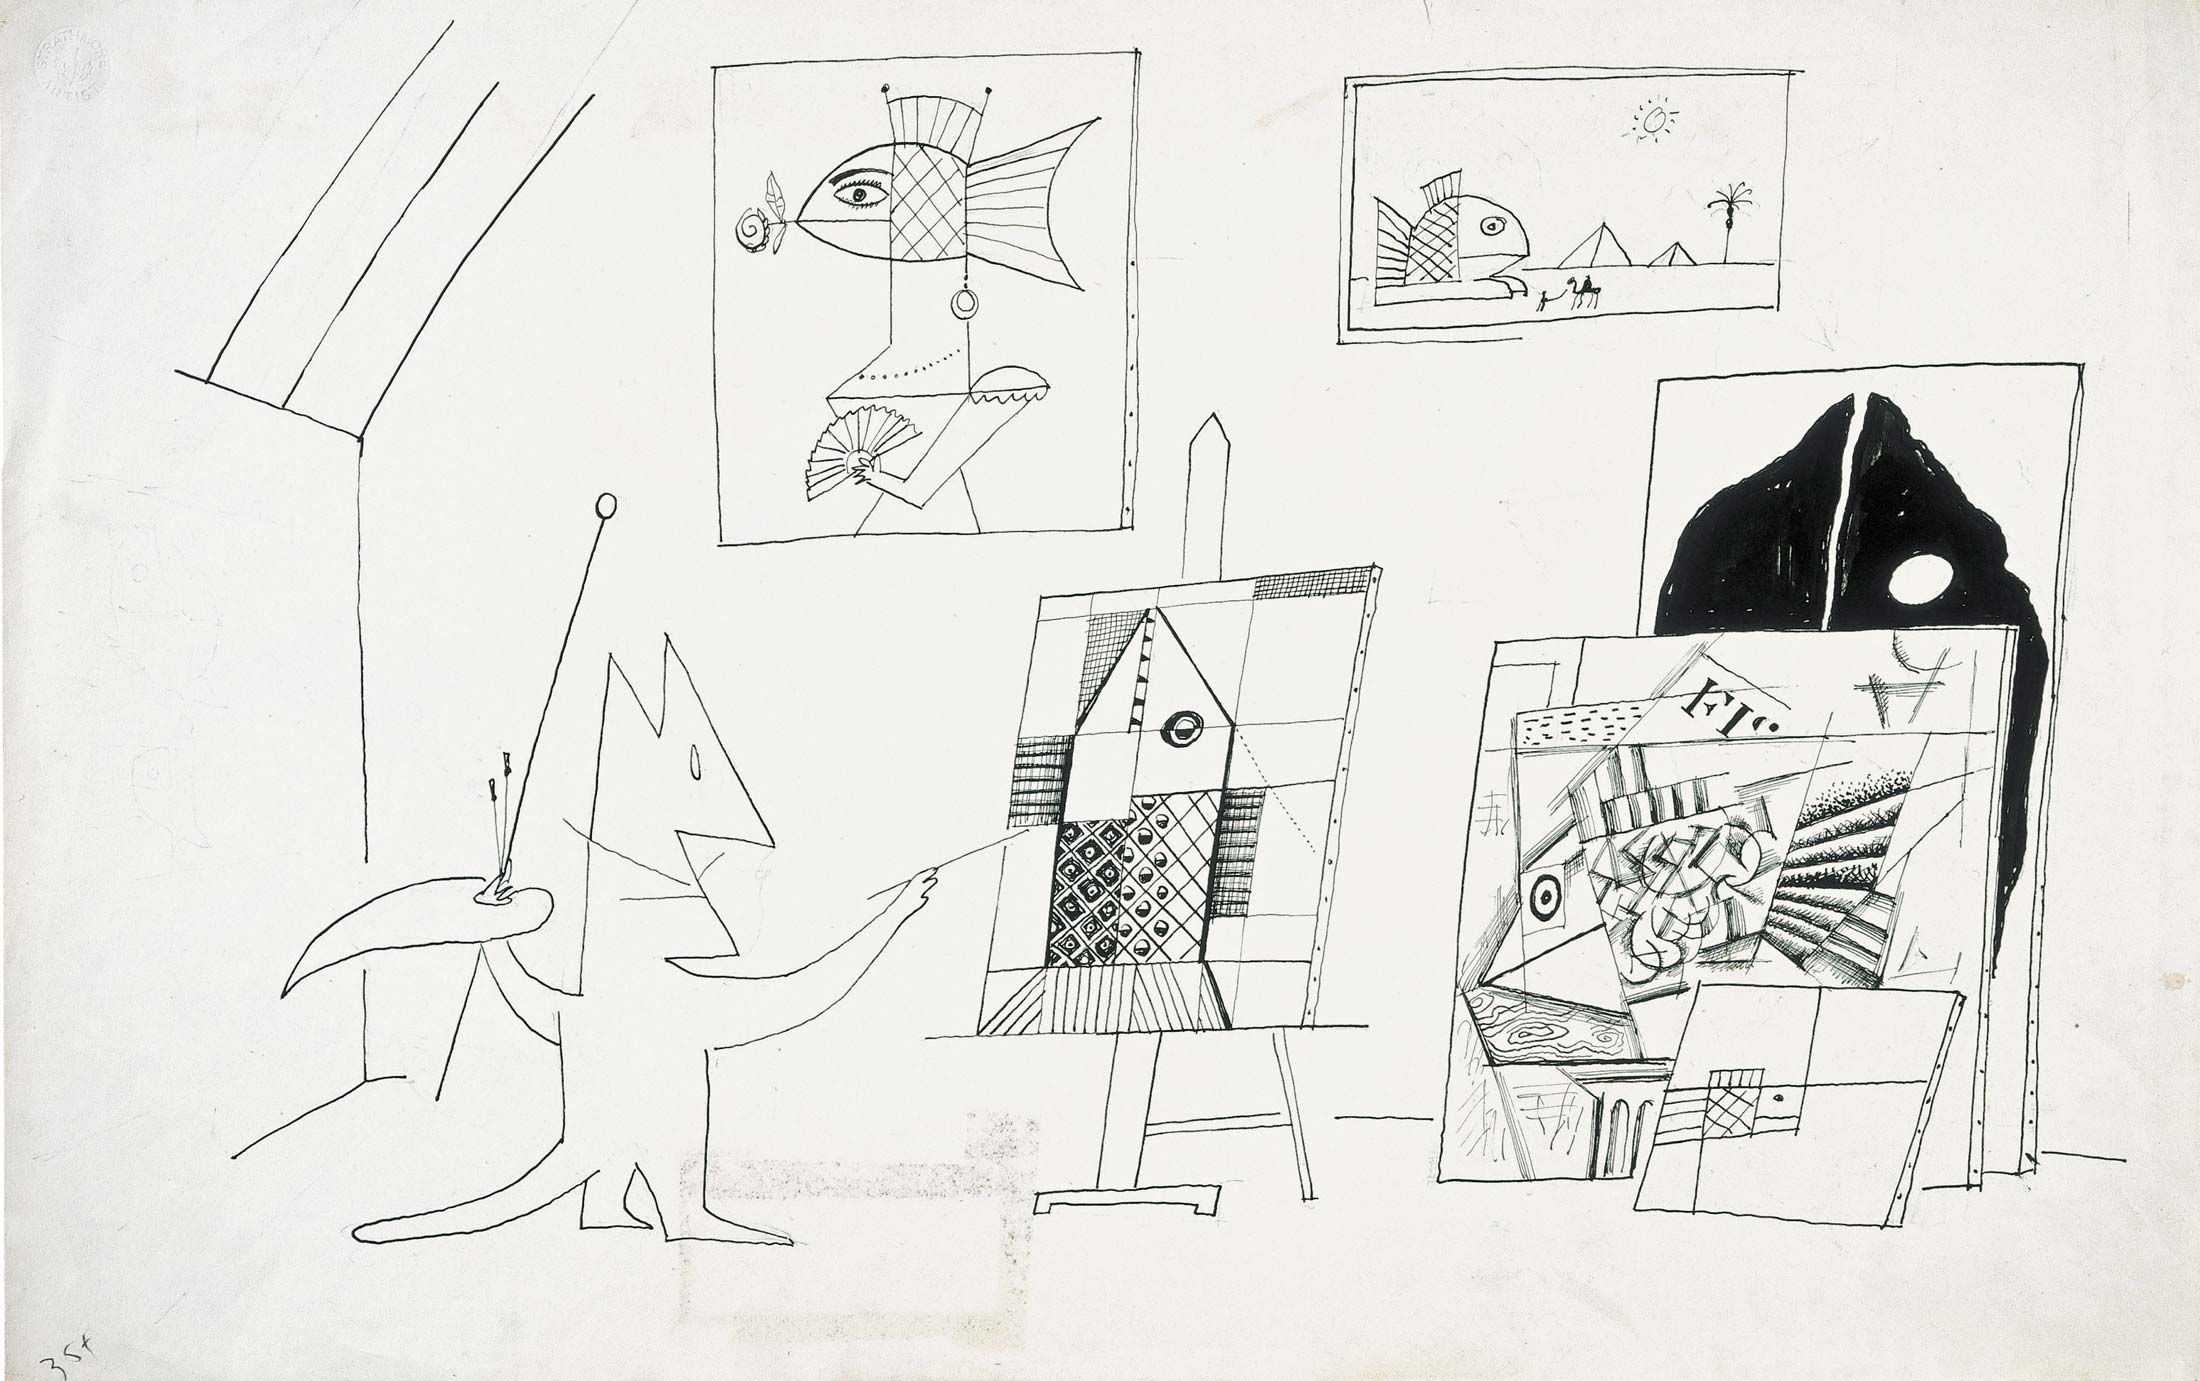 Original drawing for <em>The New Yorker</em>, August 29, 1959. Ink on paper, 14 ½ x 23 in. Saul Steinberg Papers, Beinecke Rare Book and Manuscript Library, Yale University.